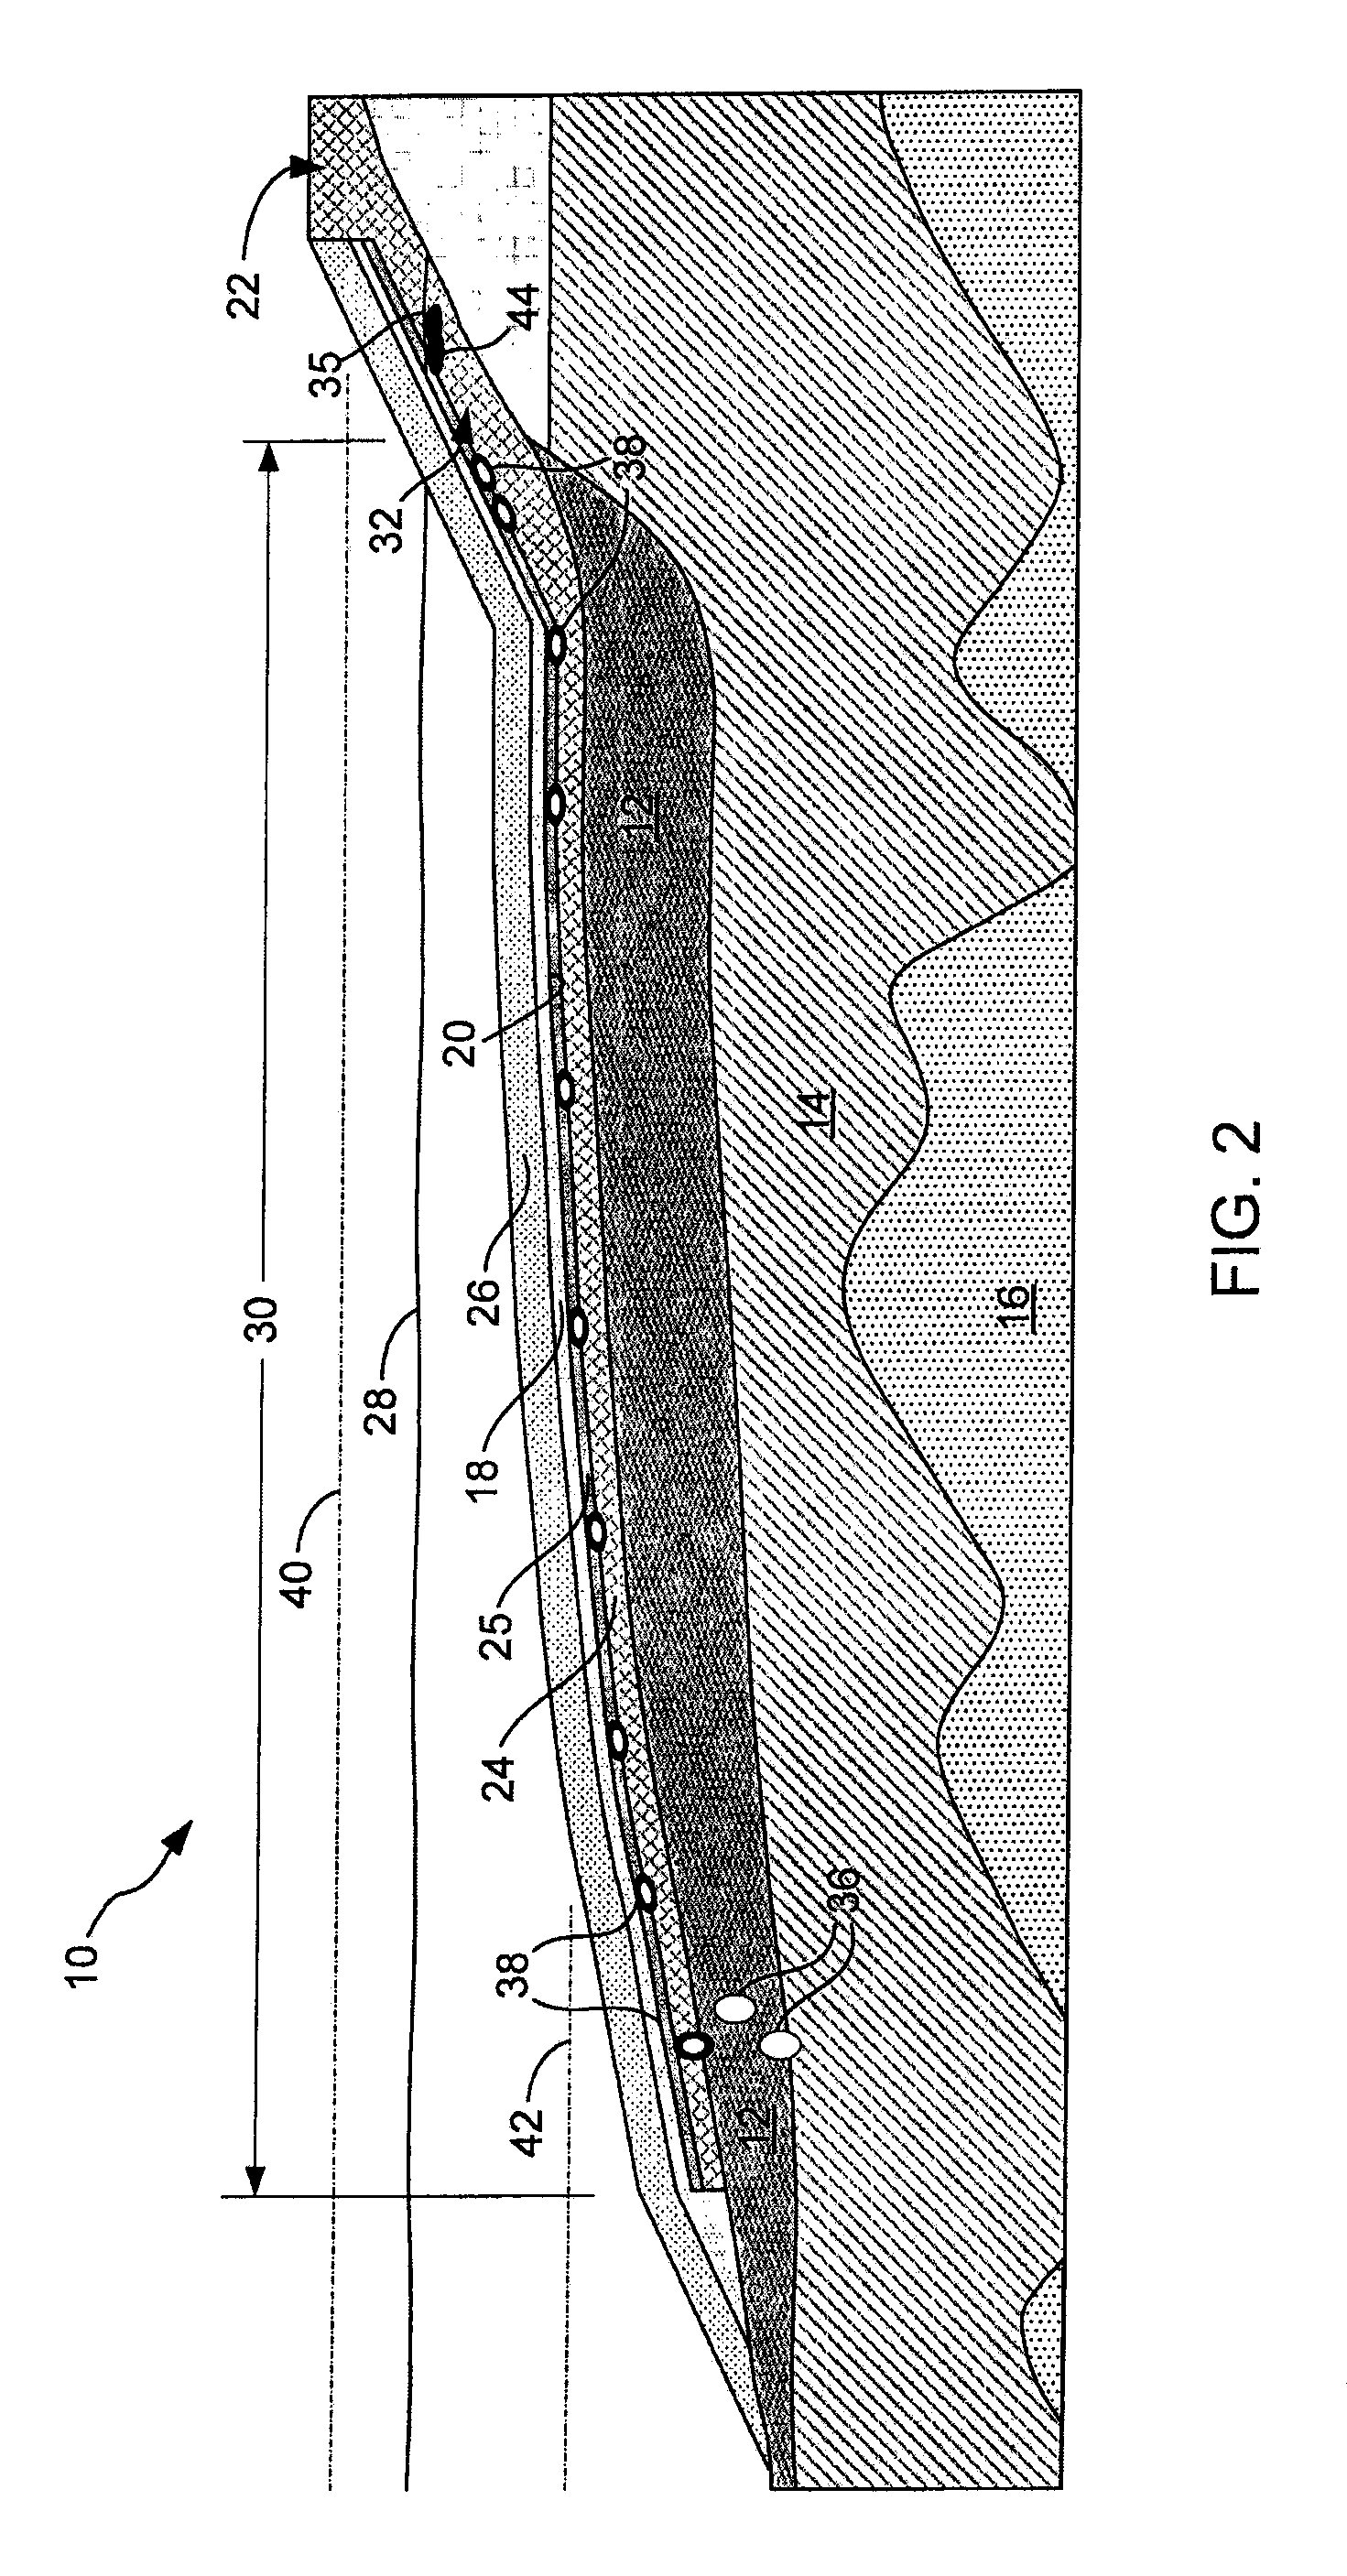 Devices and methods for directing migration of non-aqueous phase liquids from sediment